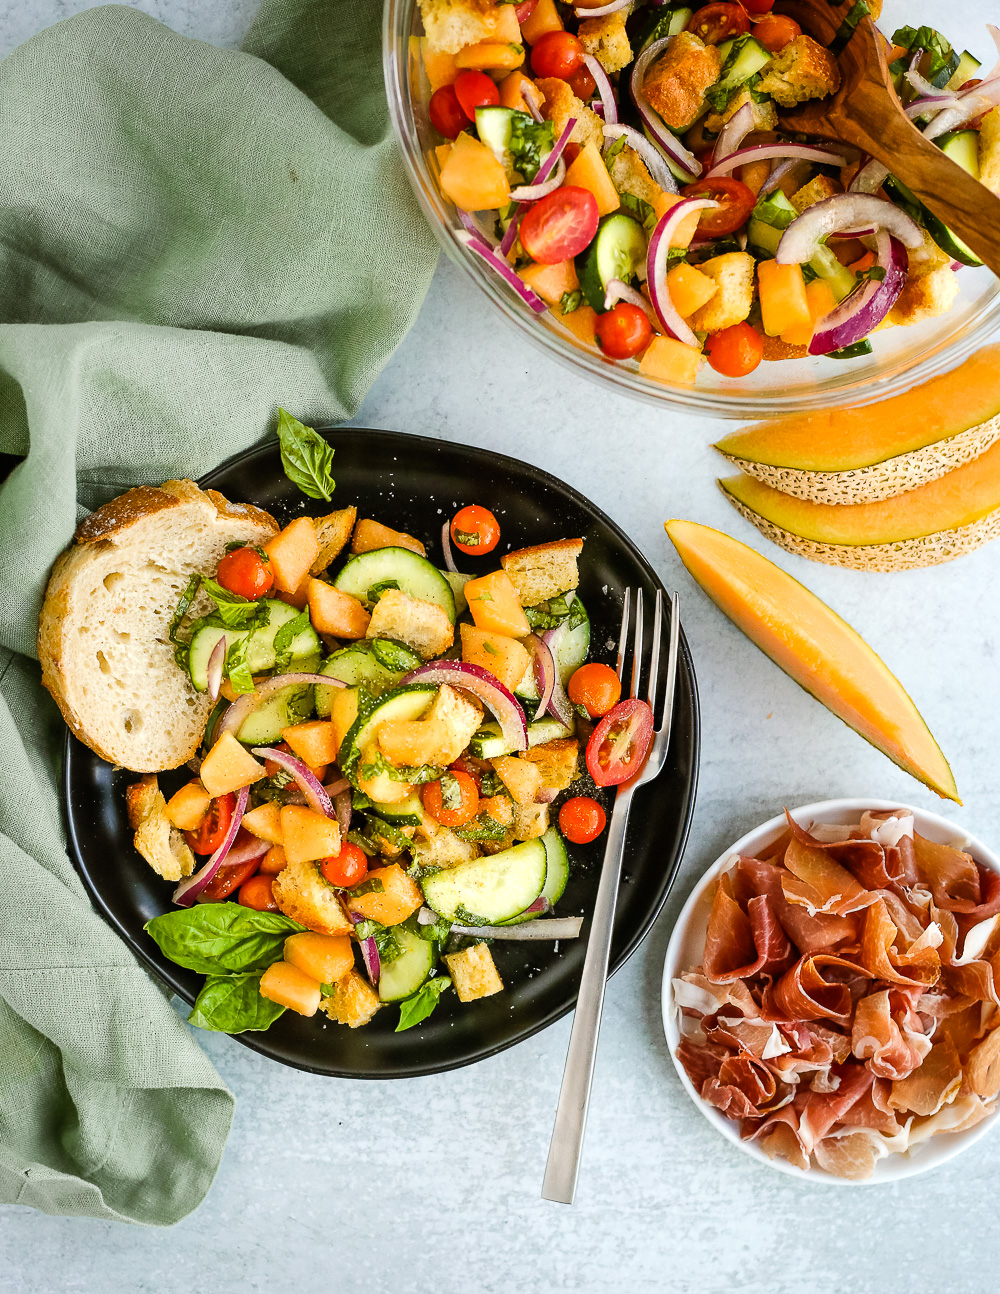 Overhead view of a summer panzanella salad with cantaloupe with prosciutto on a black plate, surrounded by ingredients and a light green linen on a light grey background